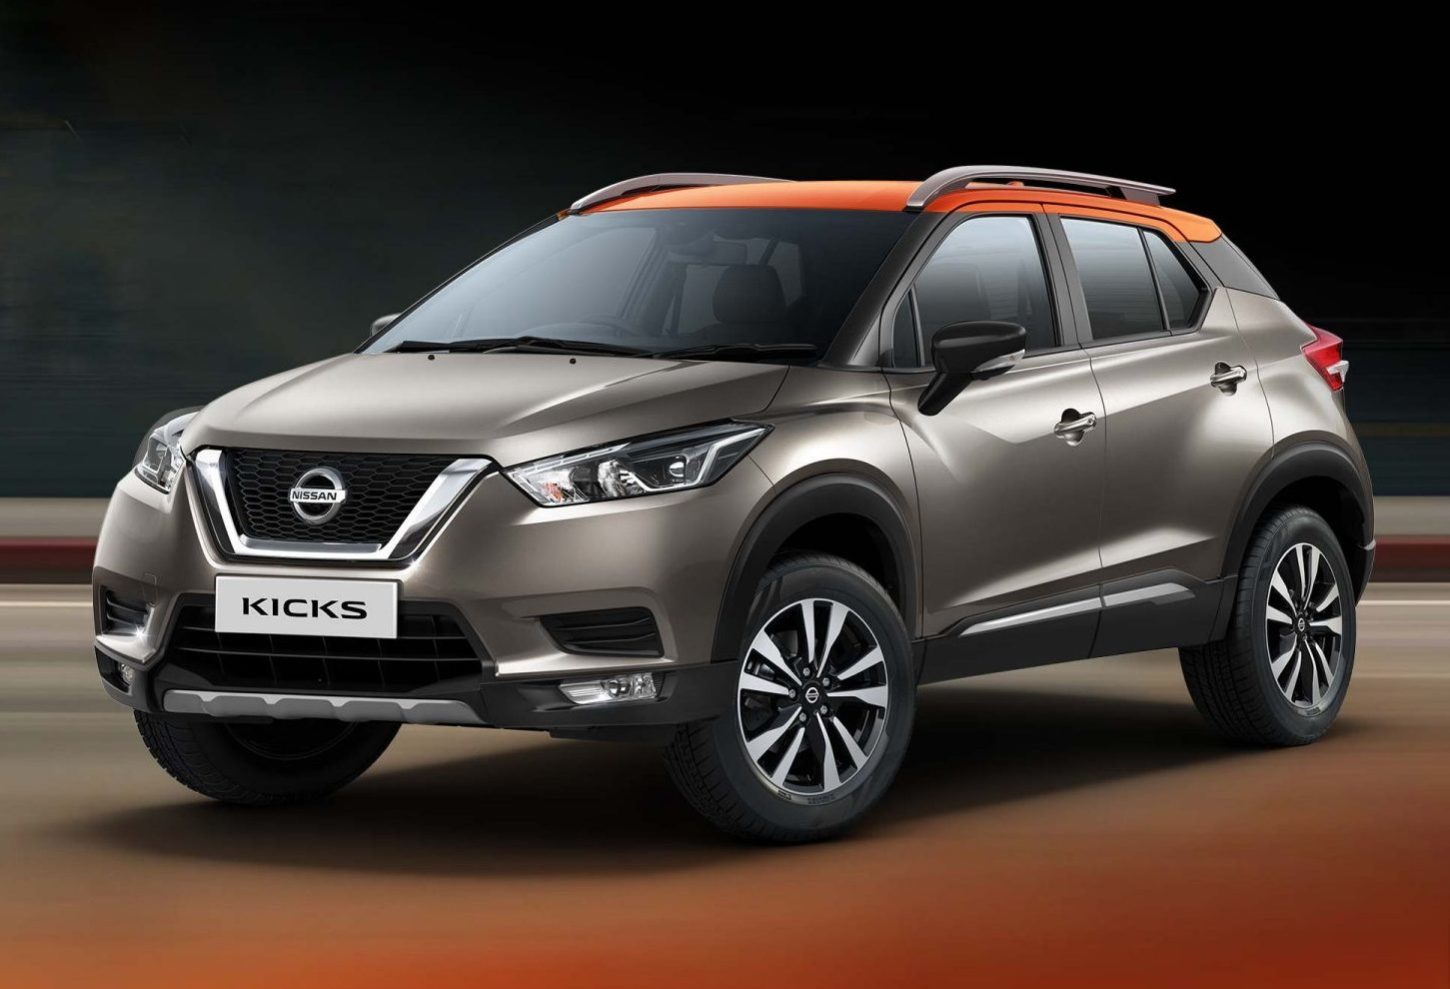 Nissan Kicks Key Features And Specifications Revealed CarSaar